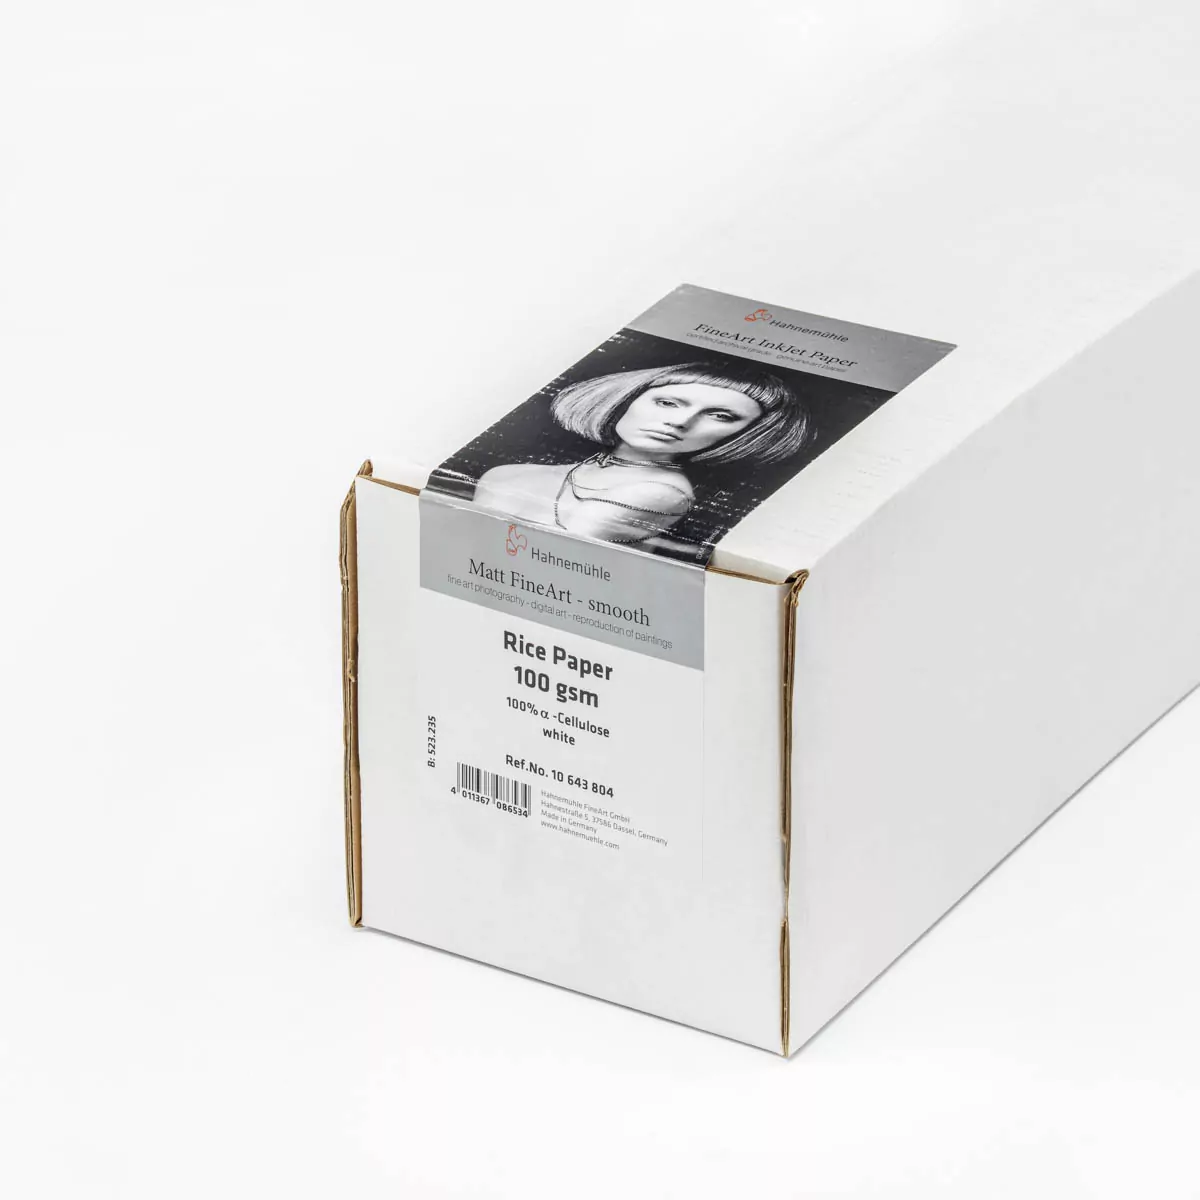 Hahnemuhle Rice Paper 100gsm 36”(91cm)x30m roll